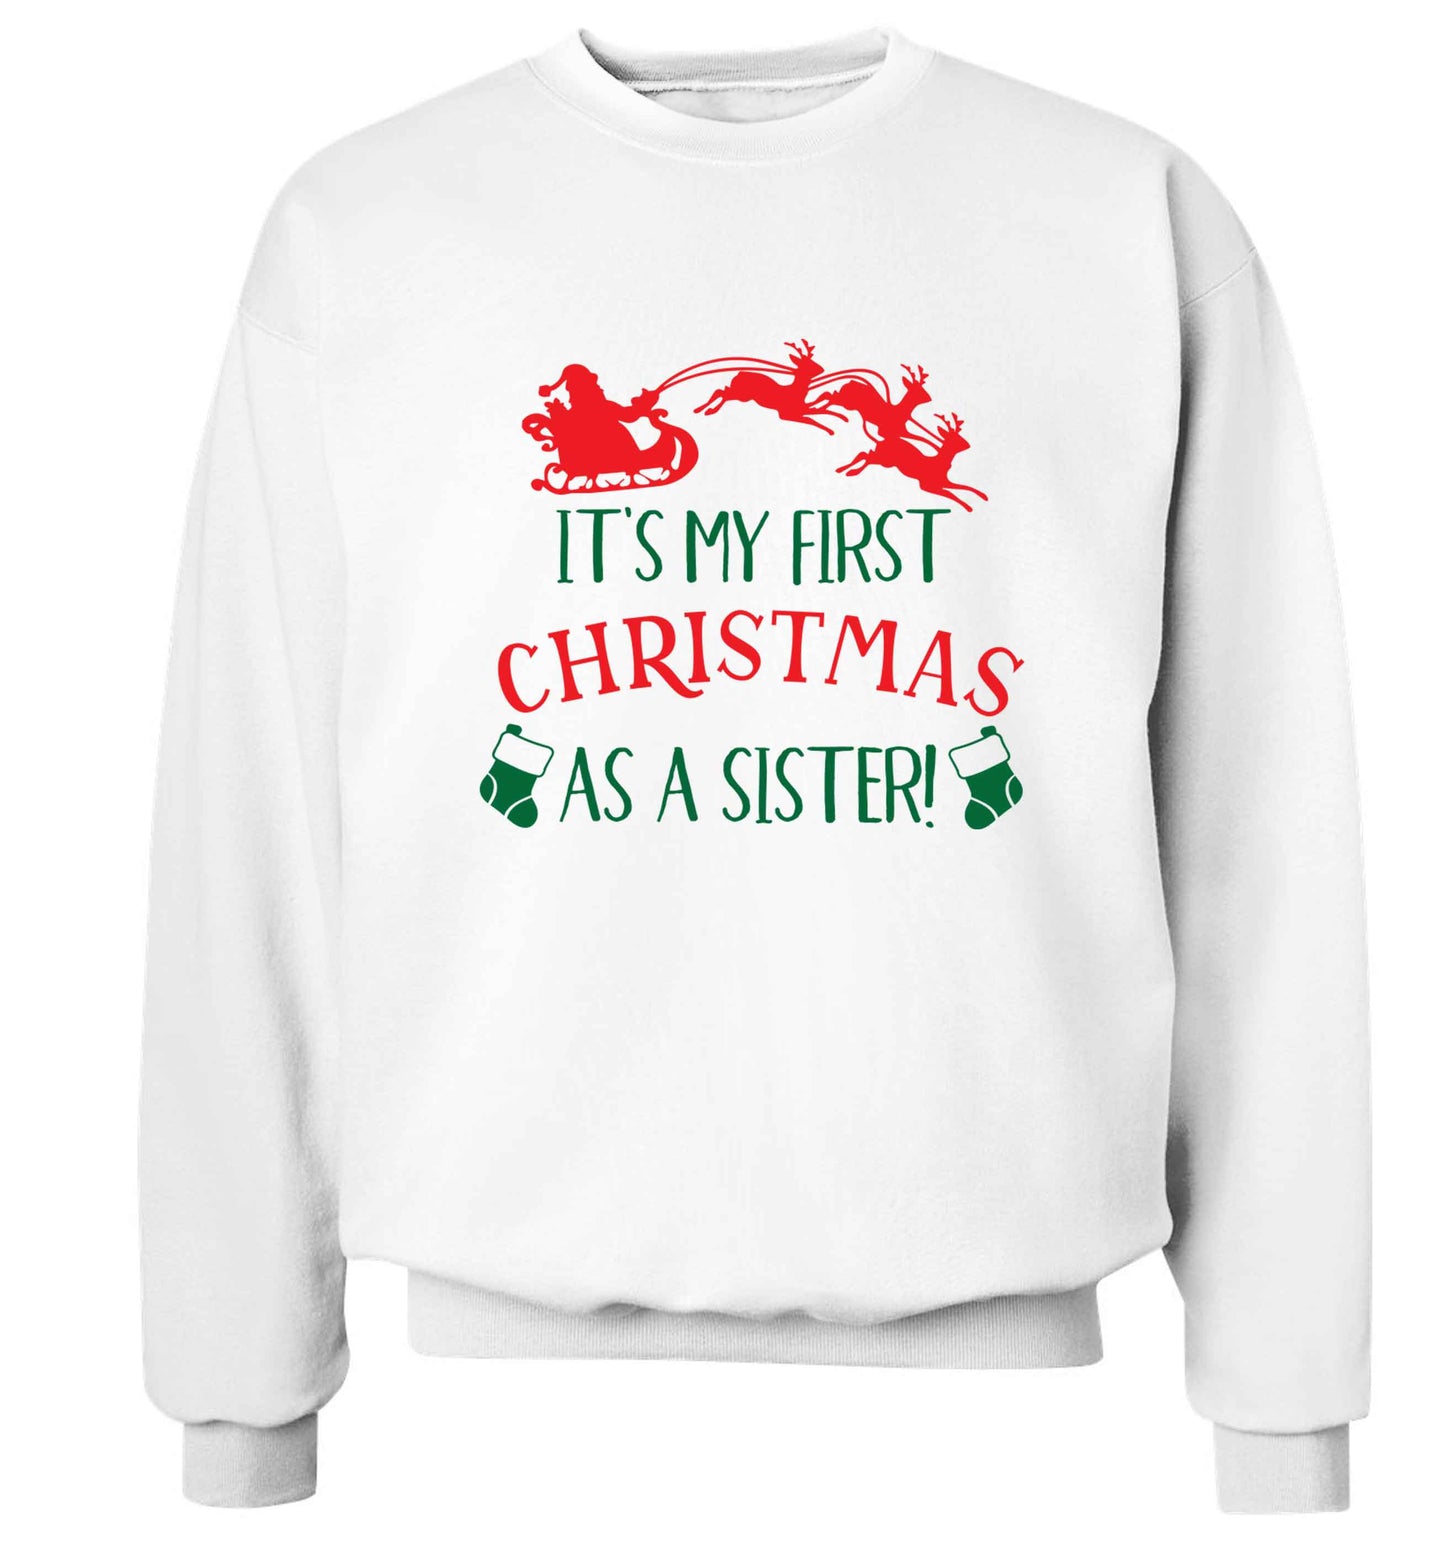 It's my first Christmas as a sister! Adult's unisex white Sweater 2XL